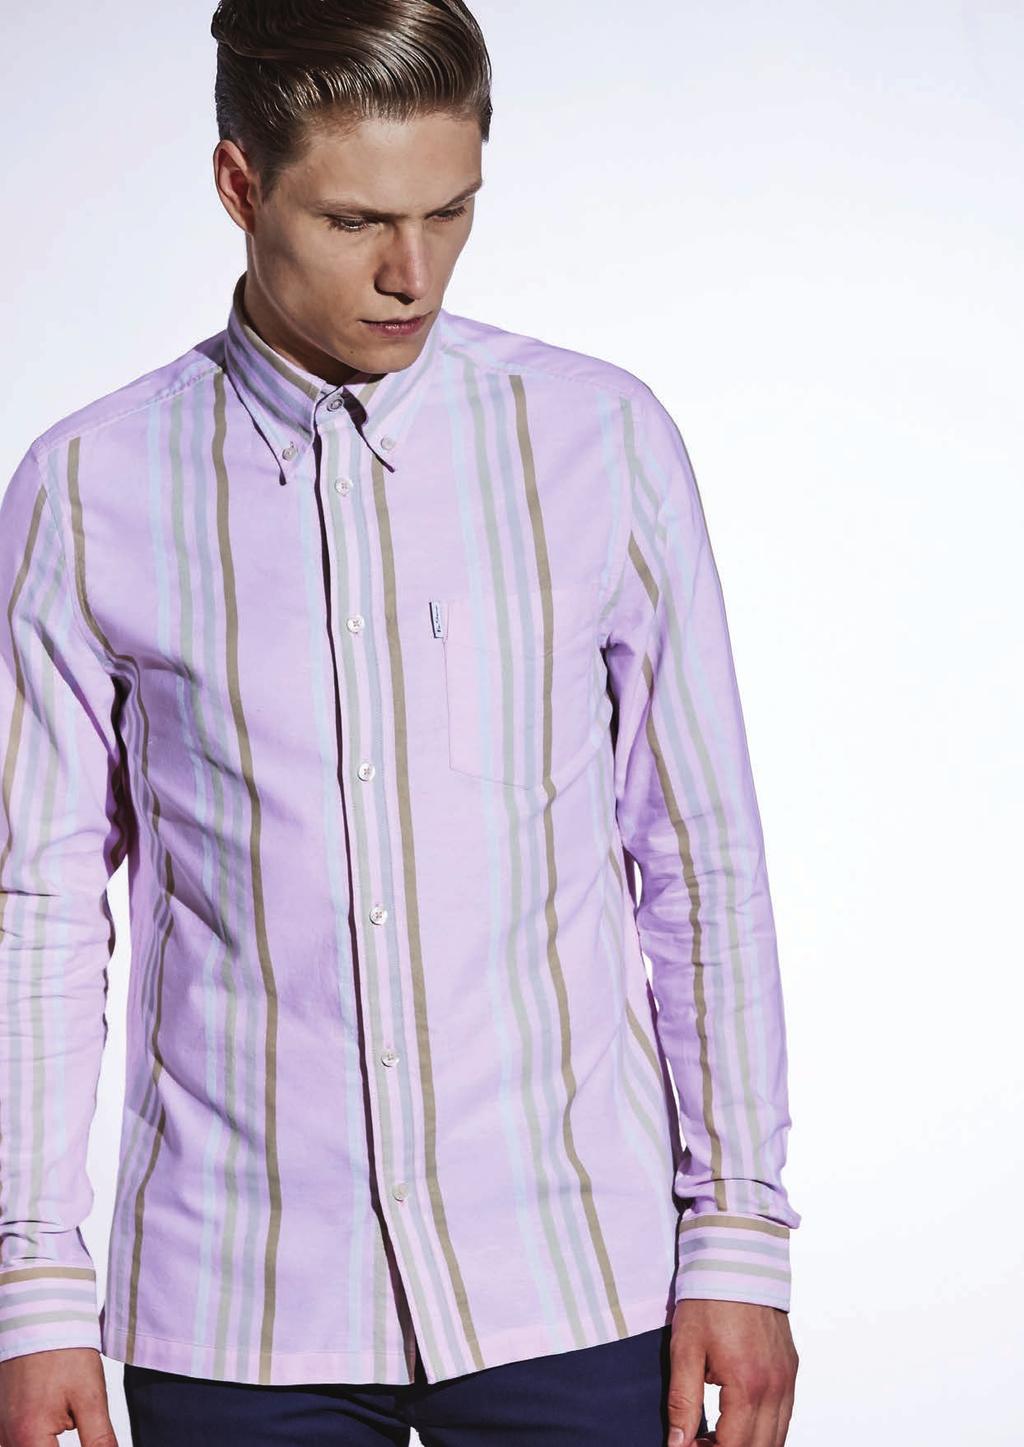 THE ARCHIVE SHIRT COLLECTION 70s Gingham A collection of limited edition shirts from the archives 80s TARTAN In 1963, Ben Sherman redefined the shirt, taking it